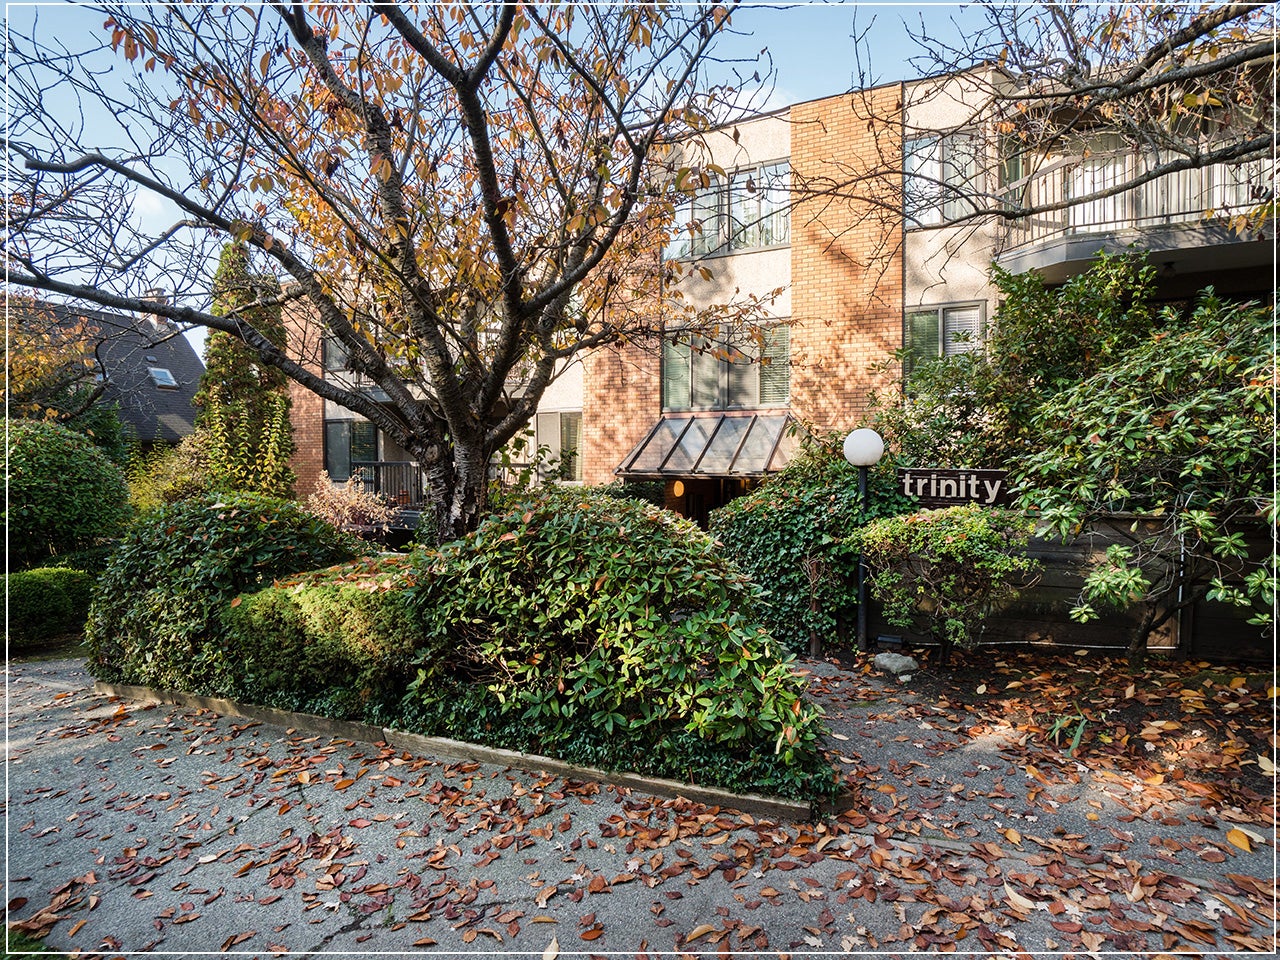 206-2355 Trinity Street, Vancouver - Hastings Apartment/Condo for sale, 2 Bedrooms (R2219768) #23